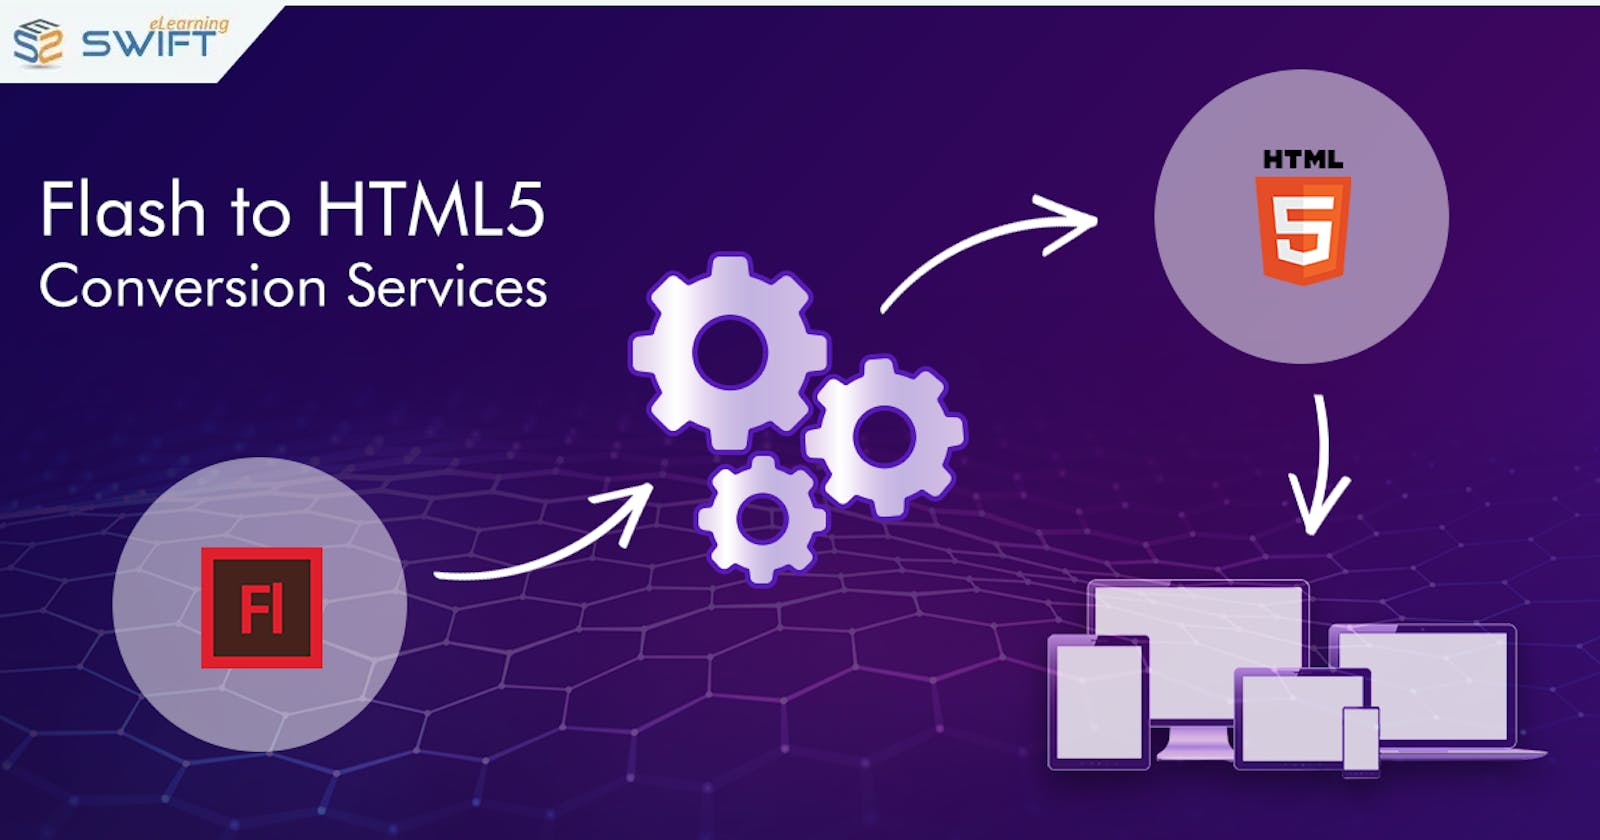 The Future of Flash to HTML5 Conversion: Trends and Predictions